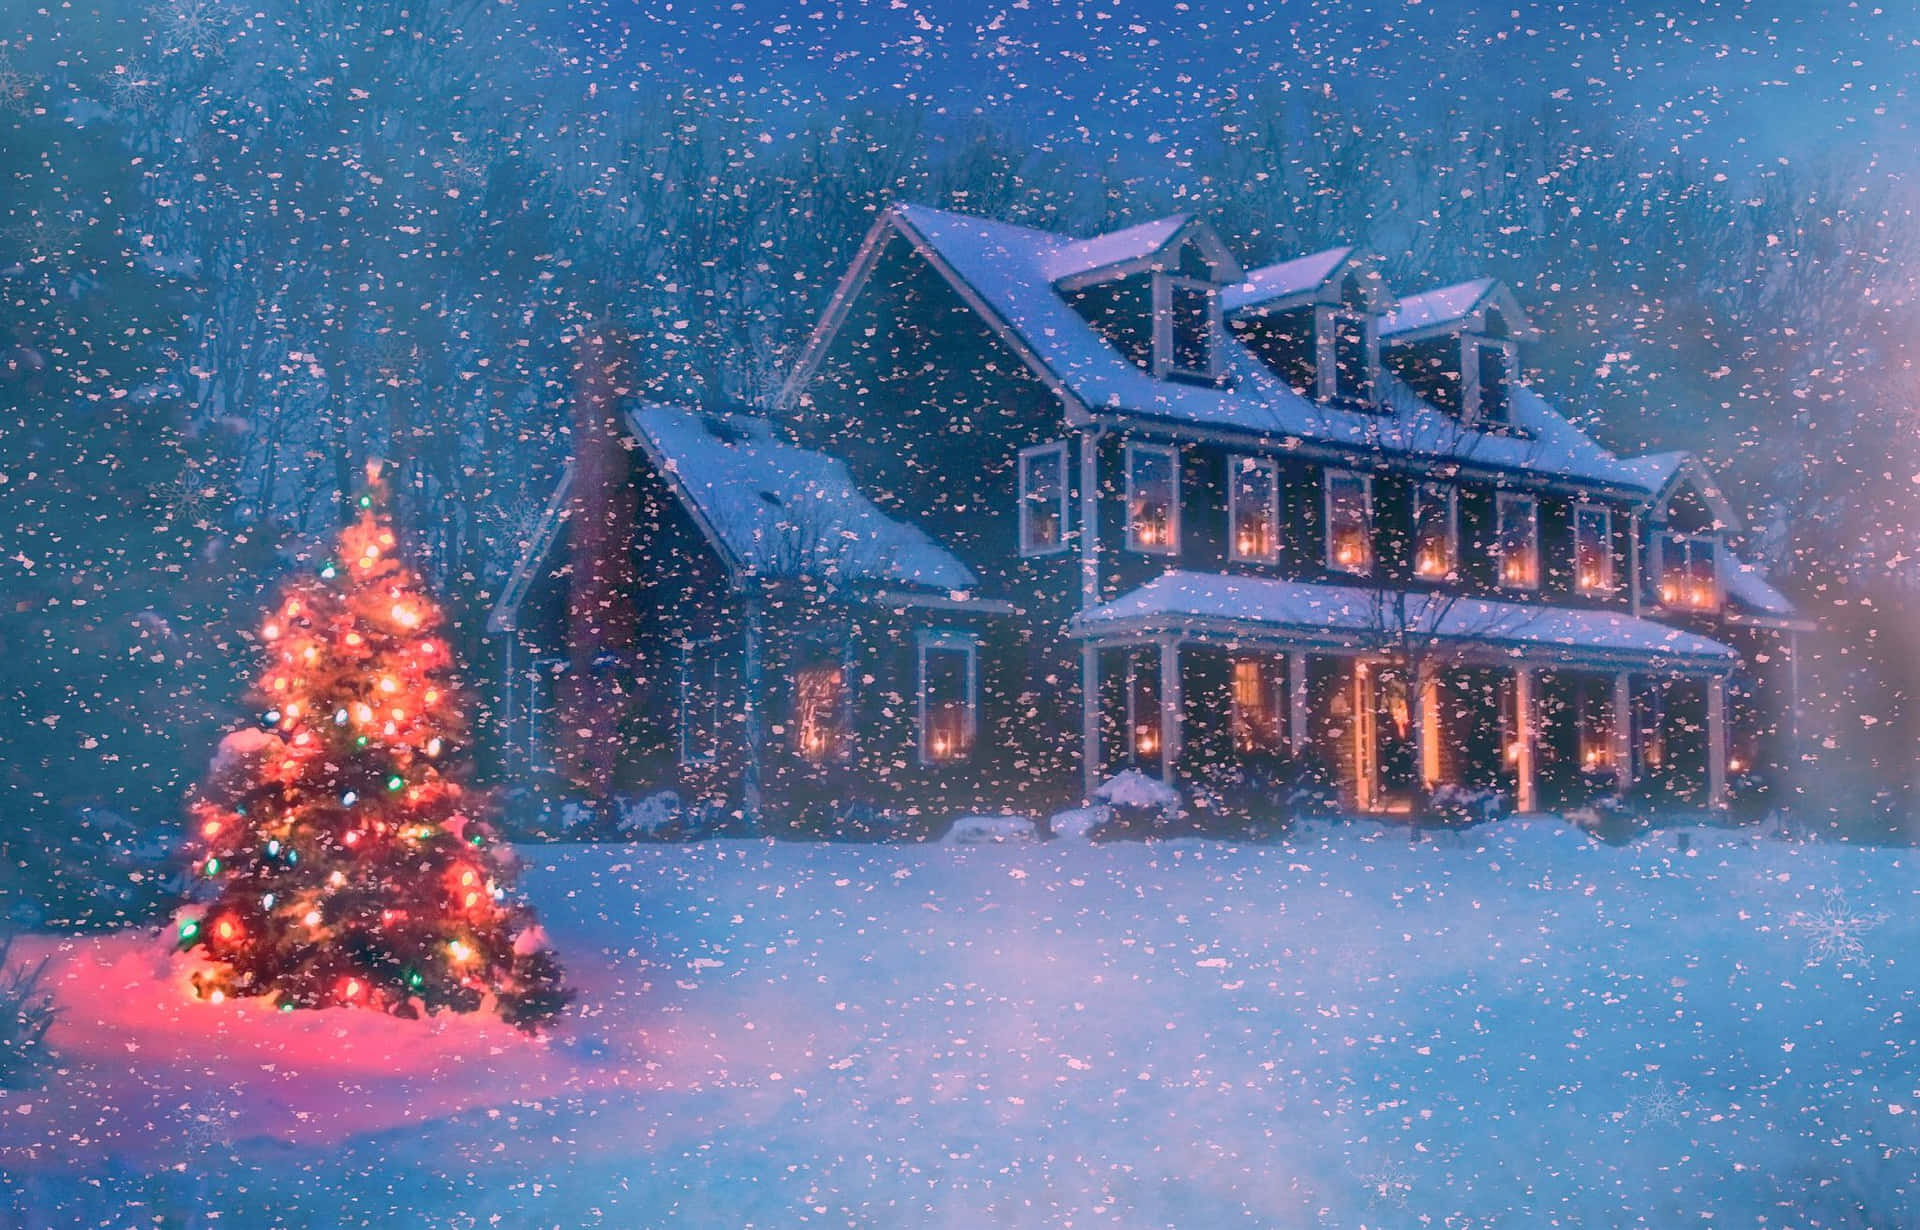 Enjoy a cosy winter evening outdoors with the perfect backdrop of Christmas Snow Wallpaper